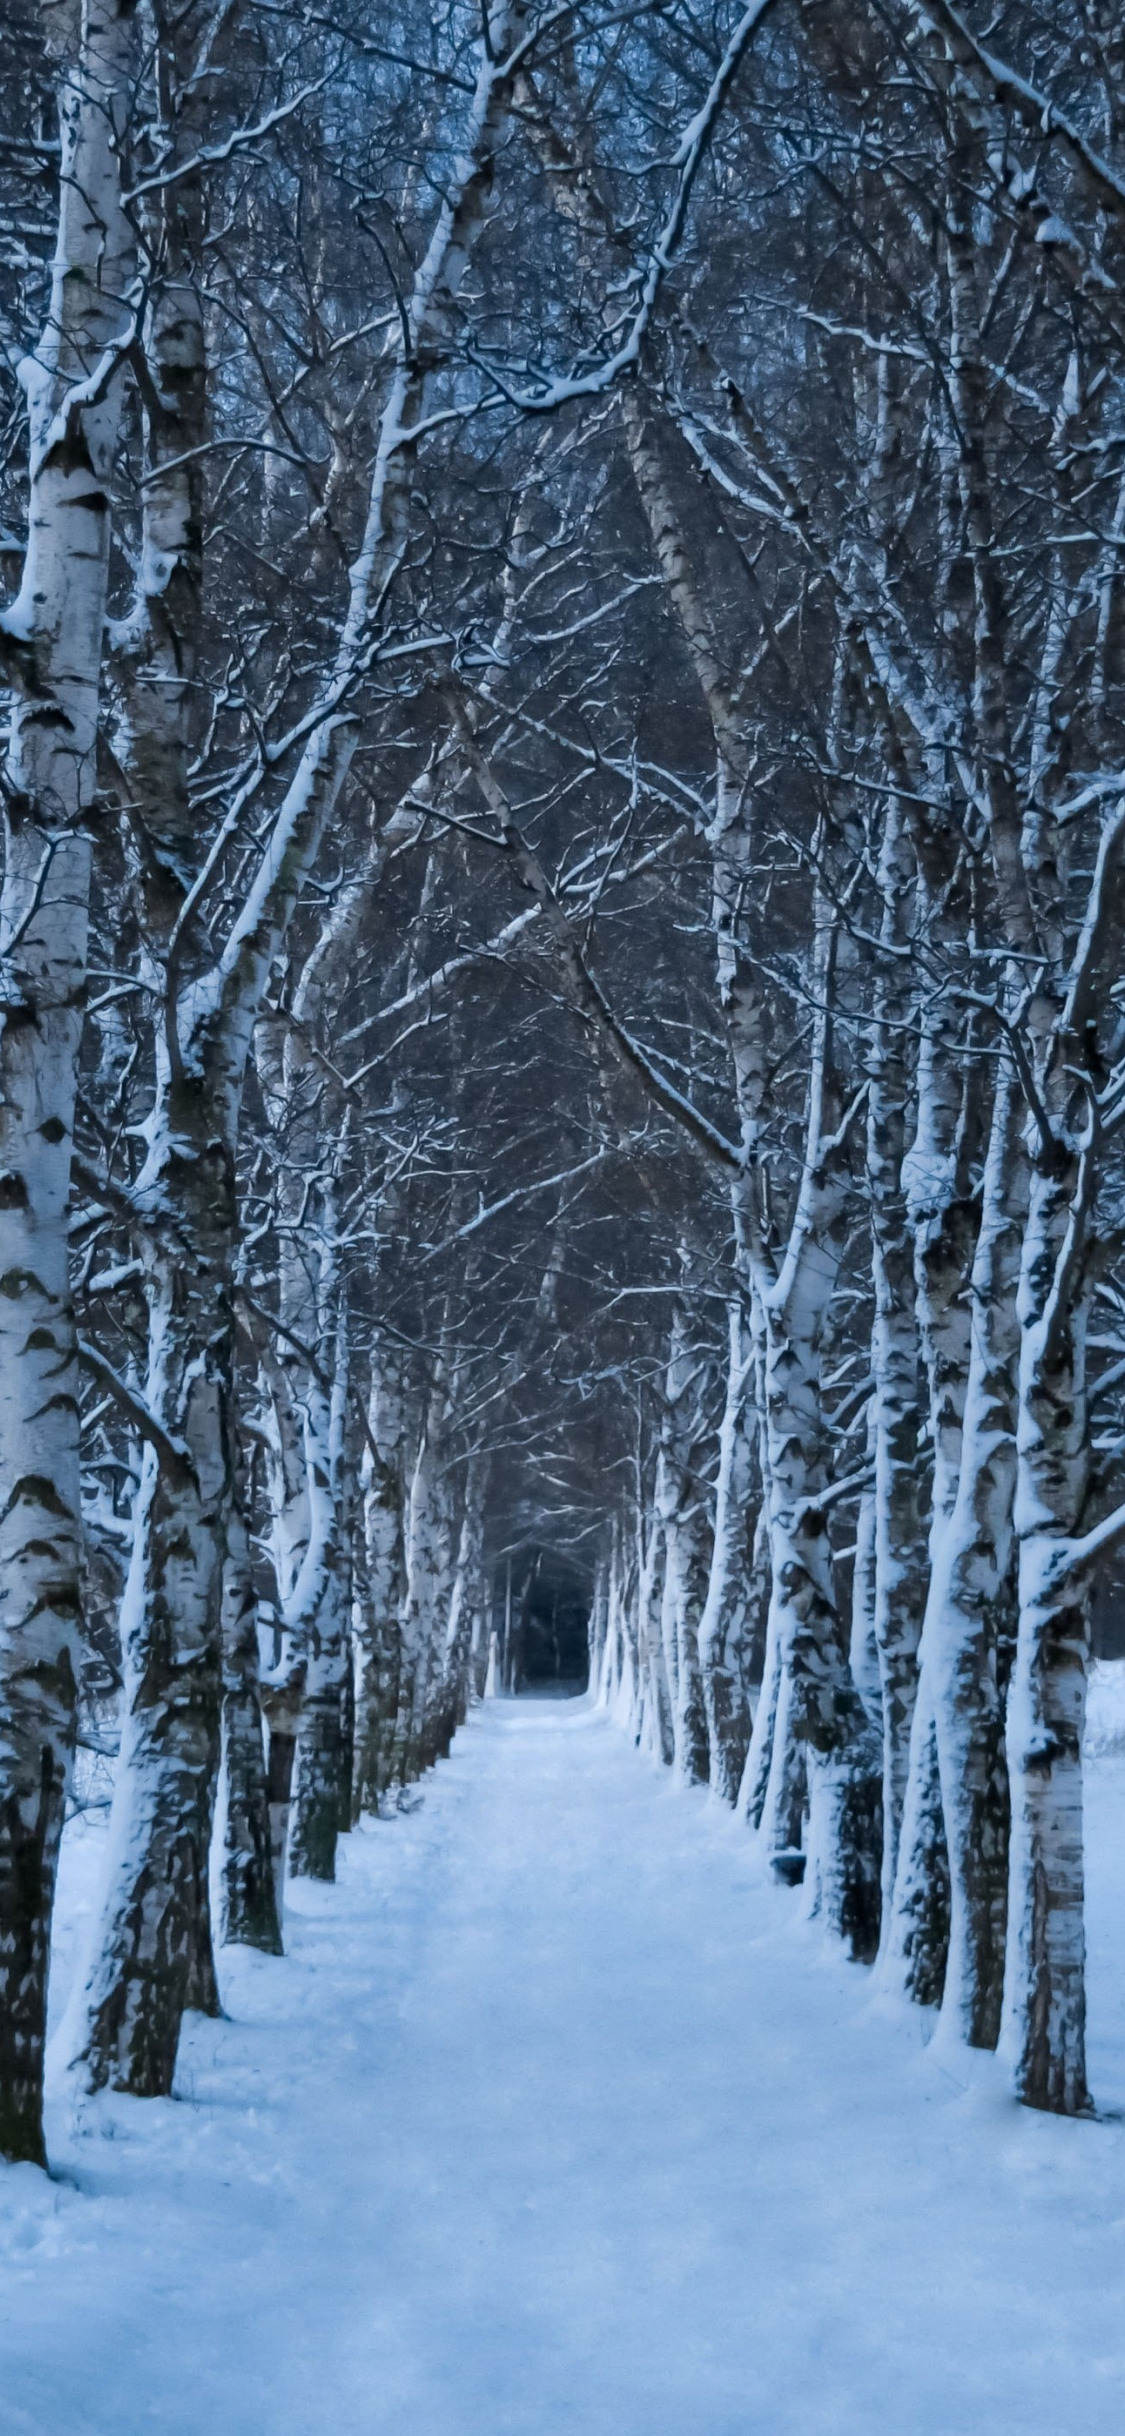 cold, winter, road, snow, trees, nature, branch, trunks